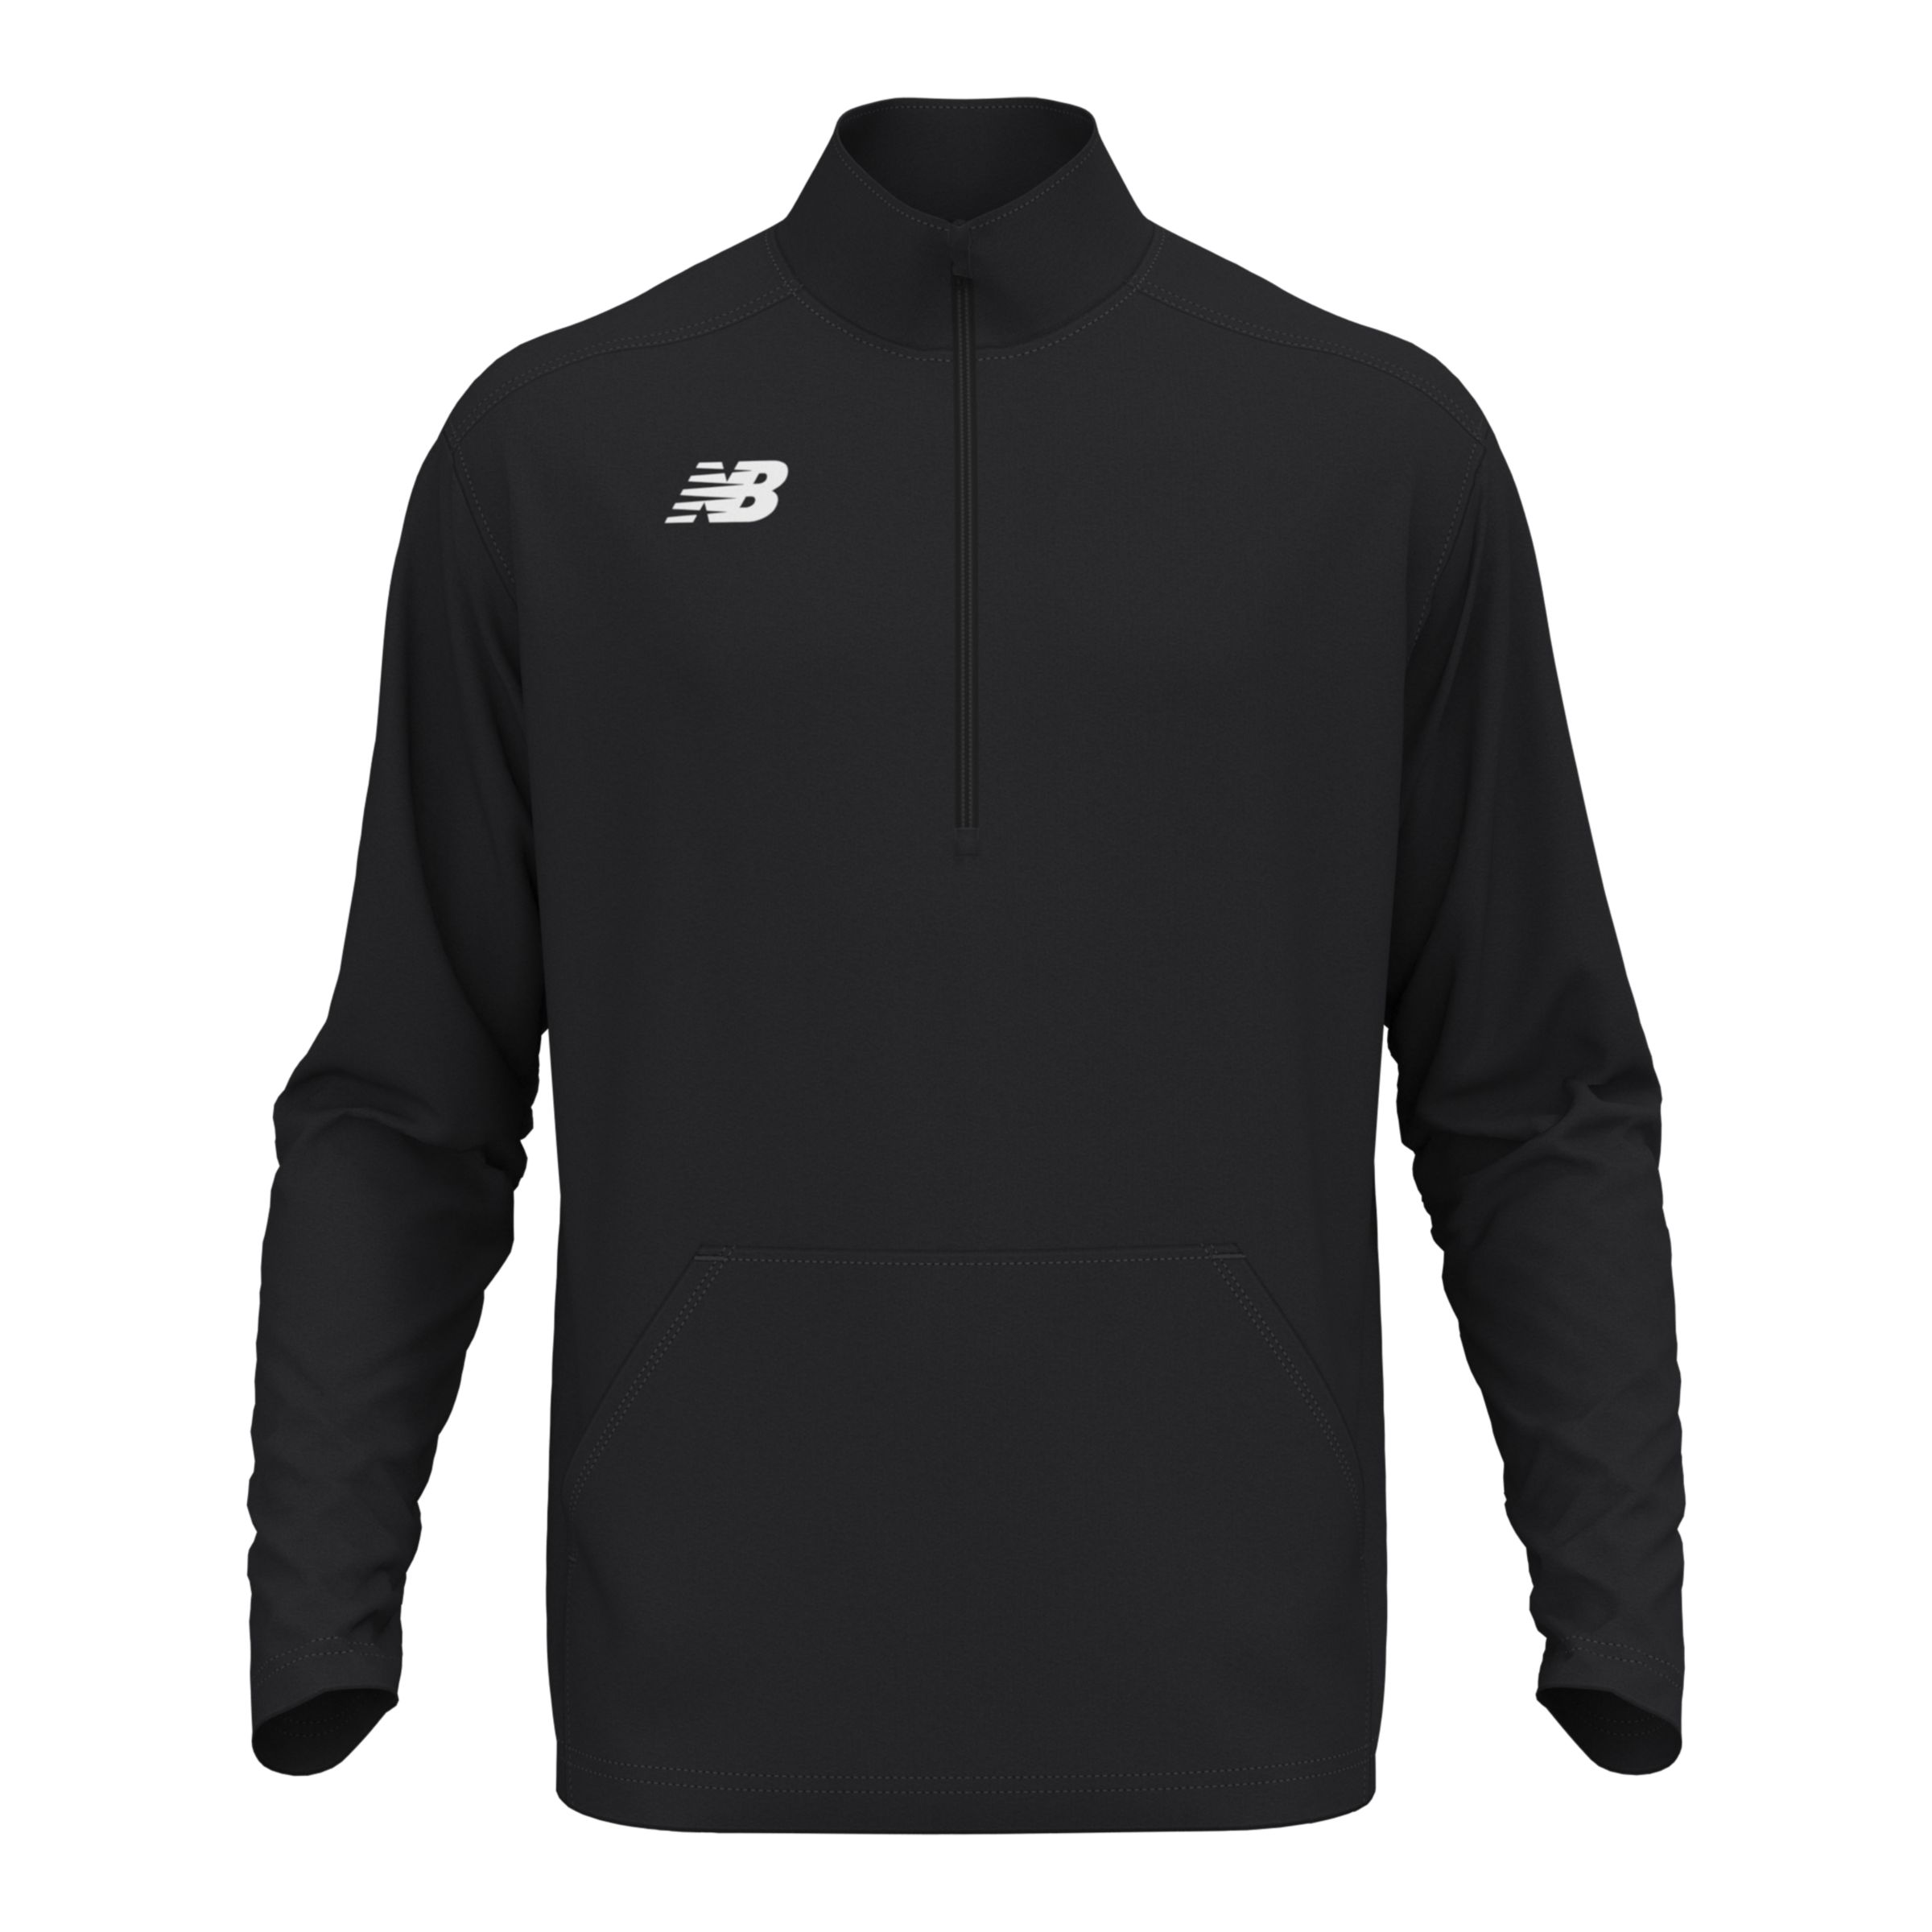 ONLY PLAY Black Zip High Neck Sports Top